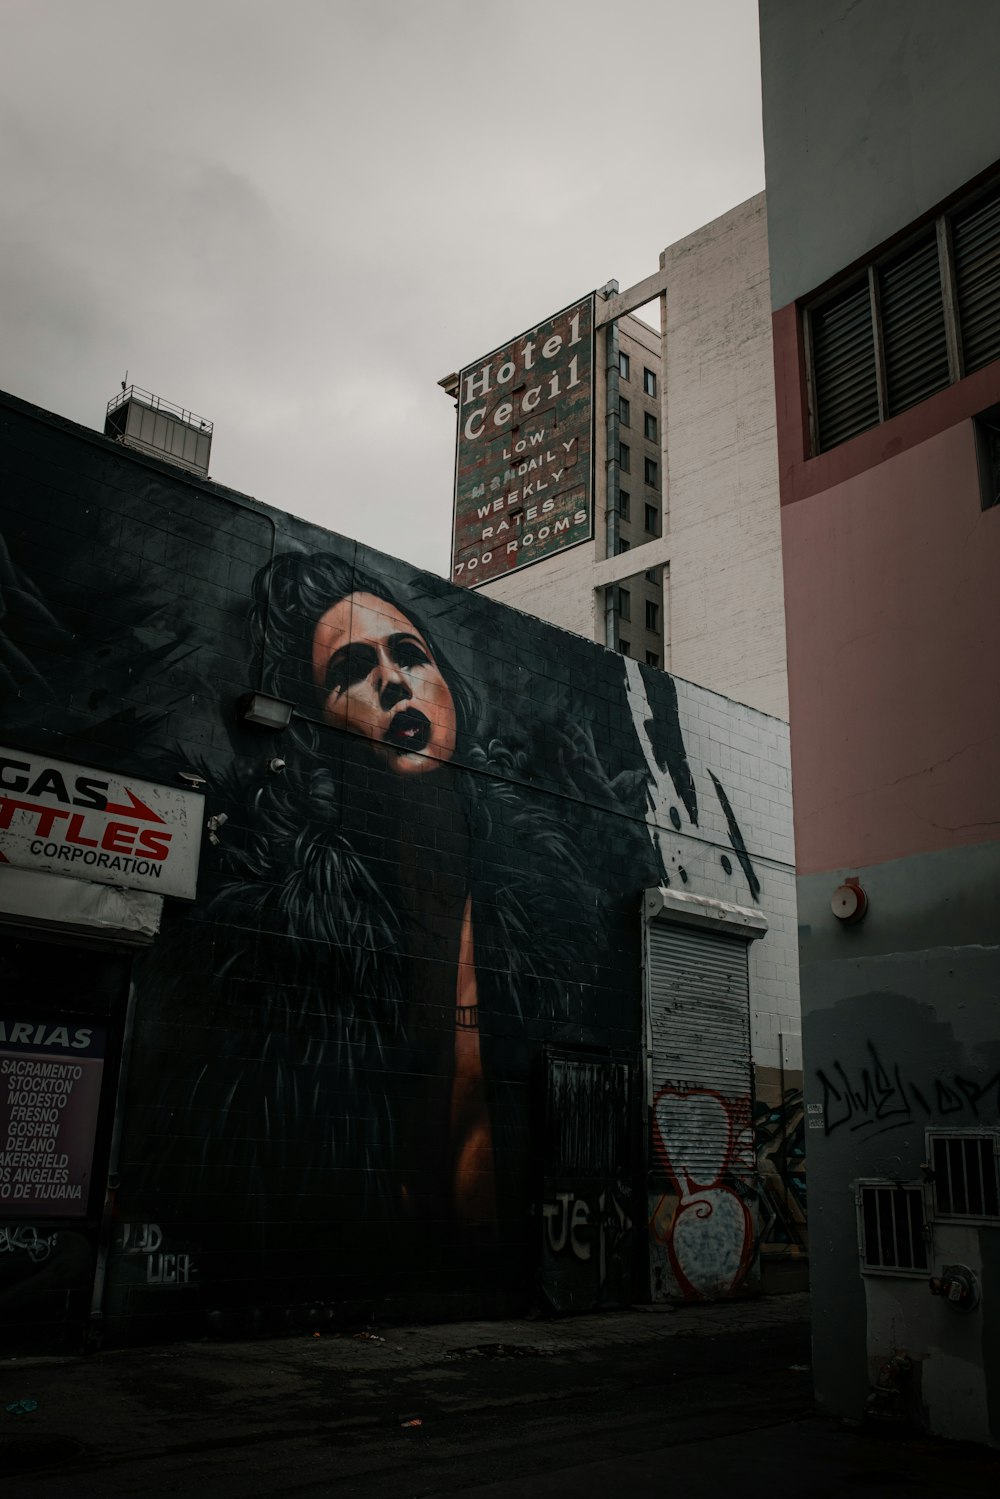 a large mural of a woman on the side of a building